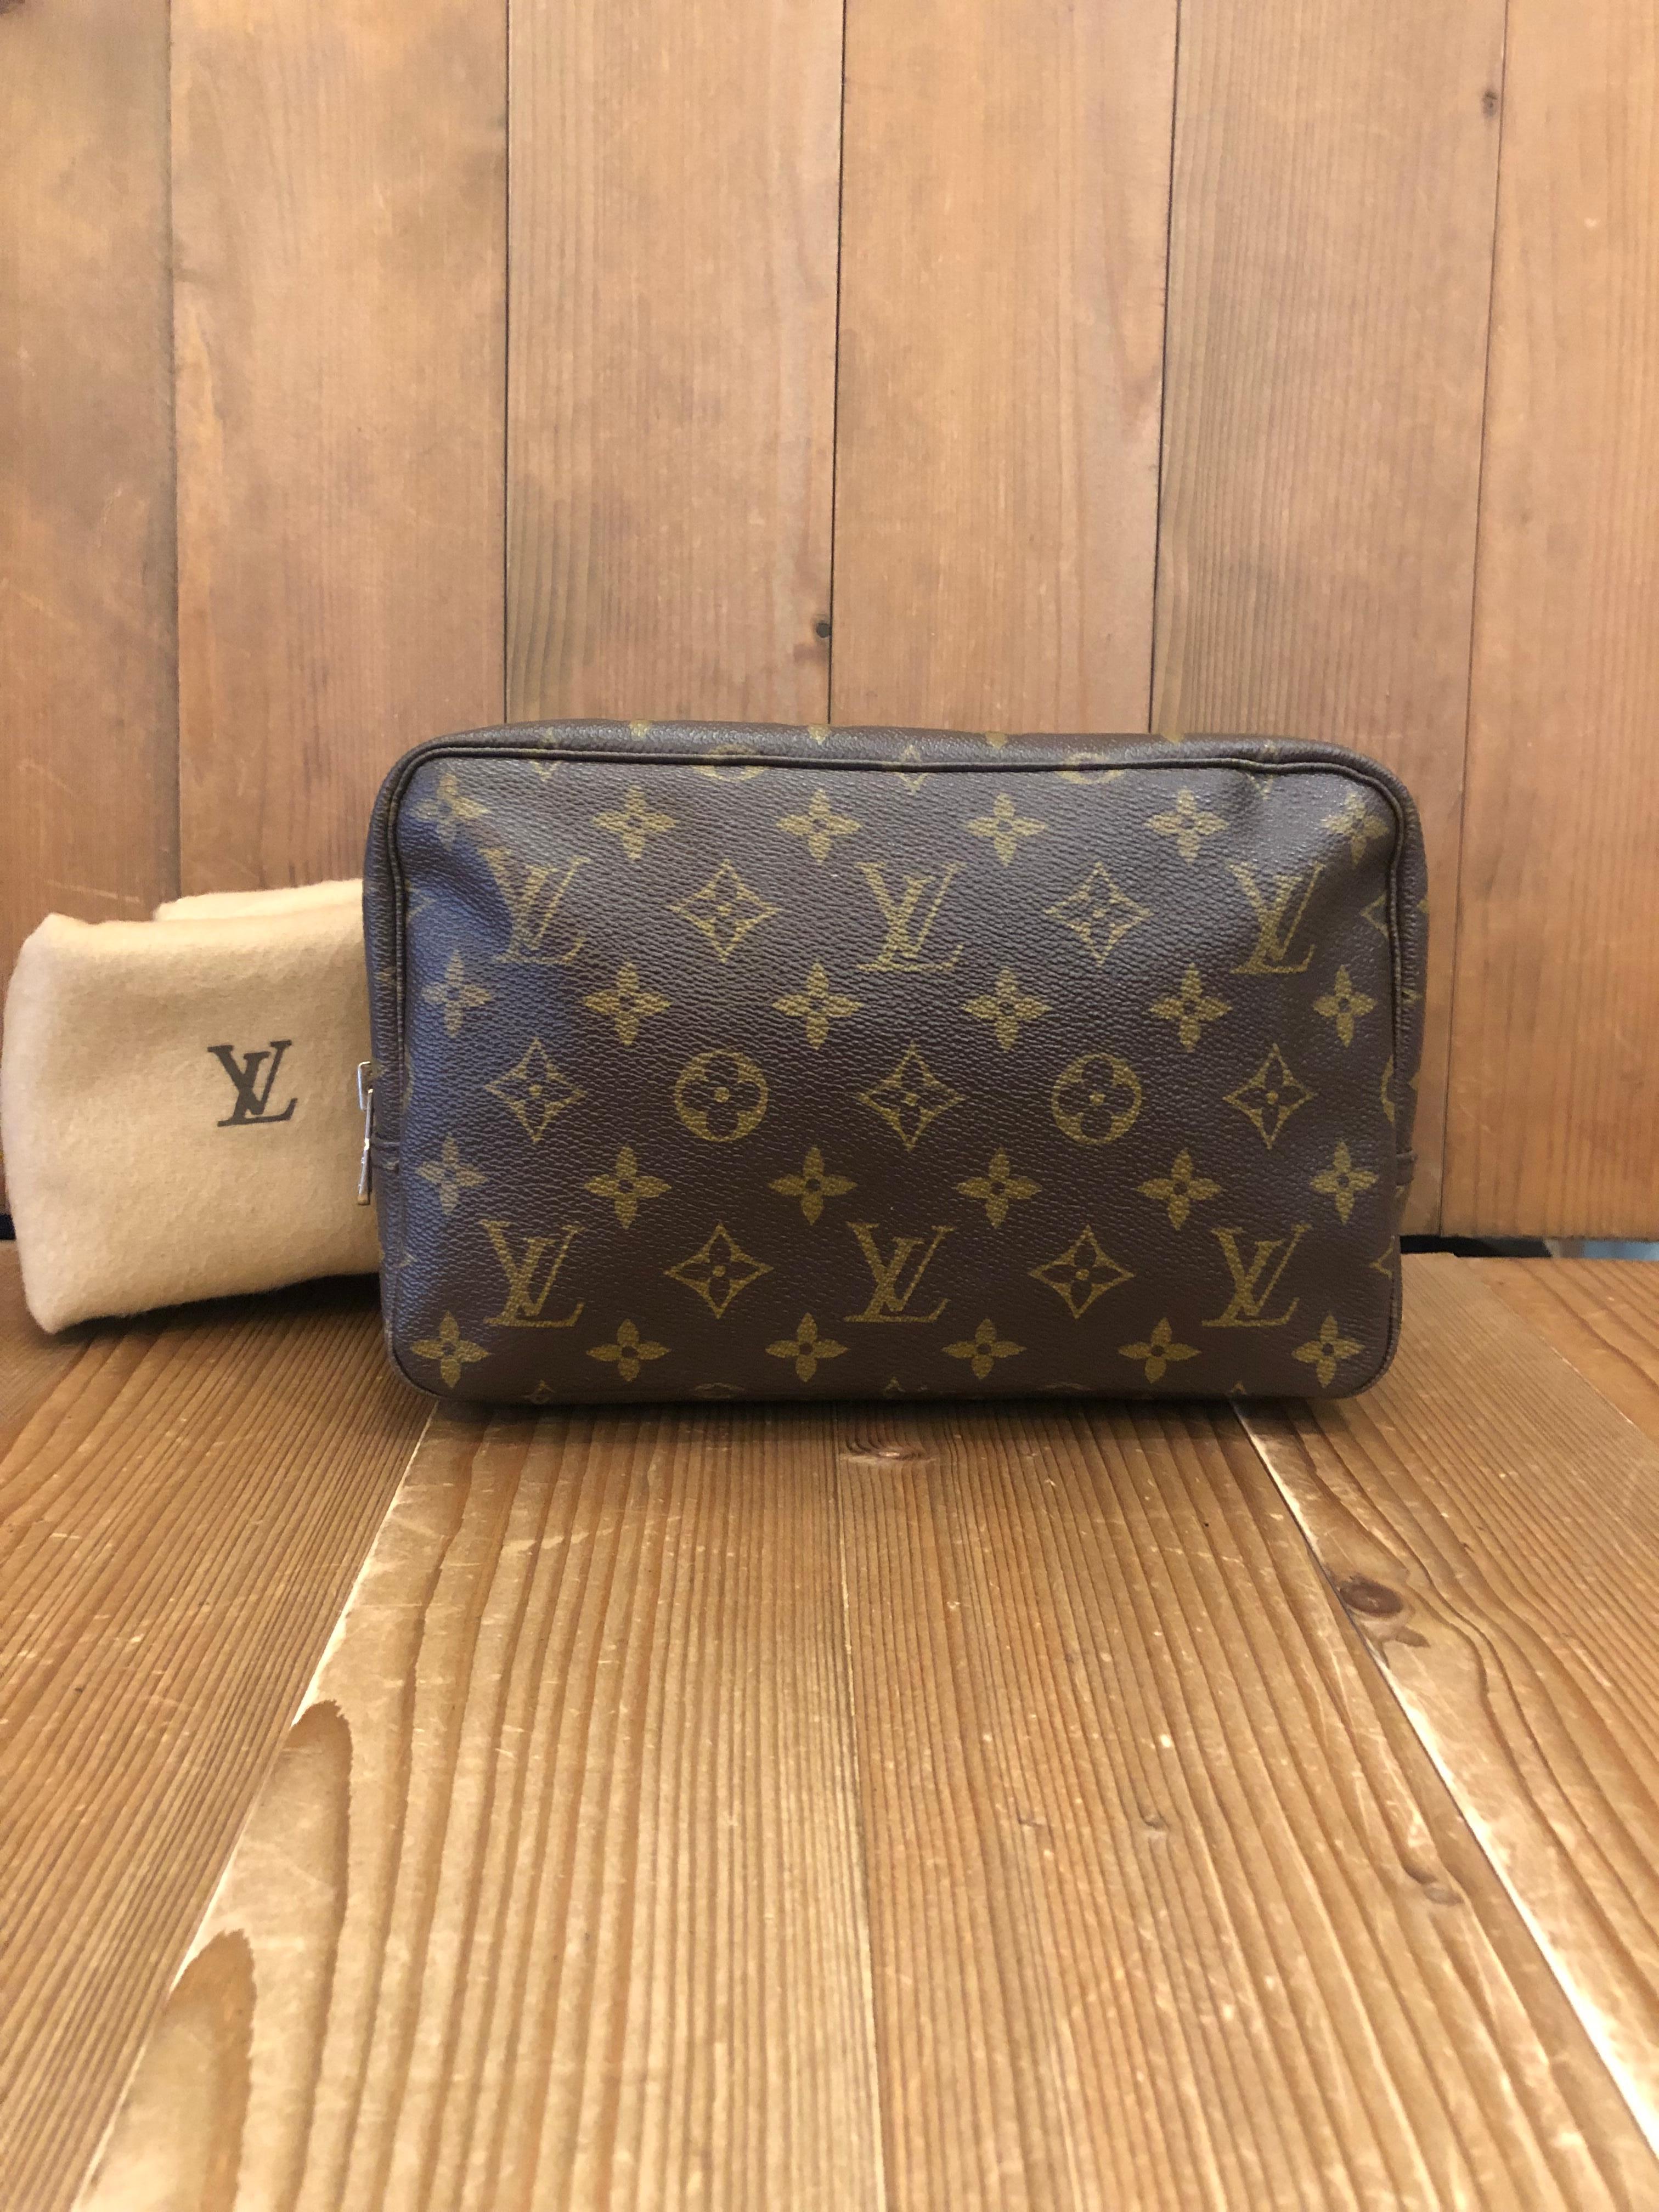 My favourite LV Trousse 23 and cosmetic case. Both are vintage but